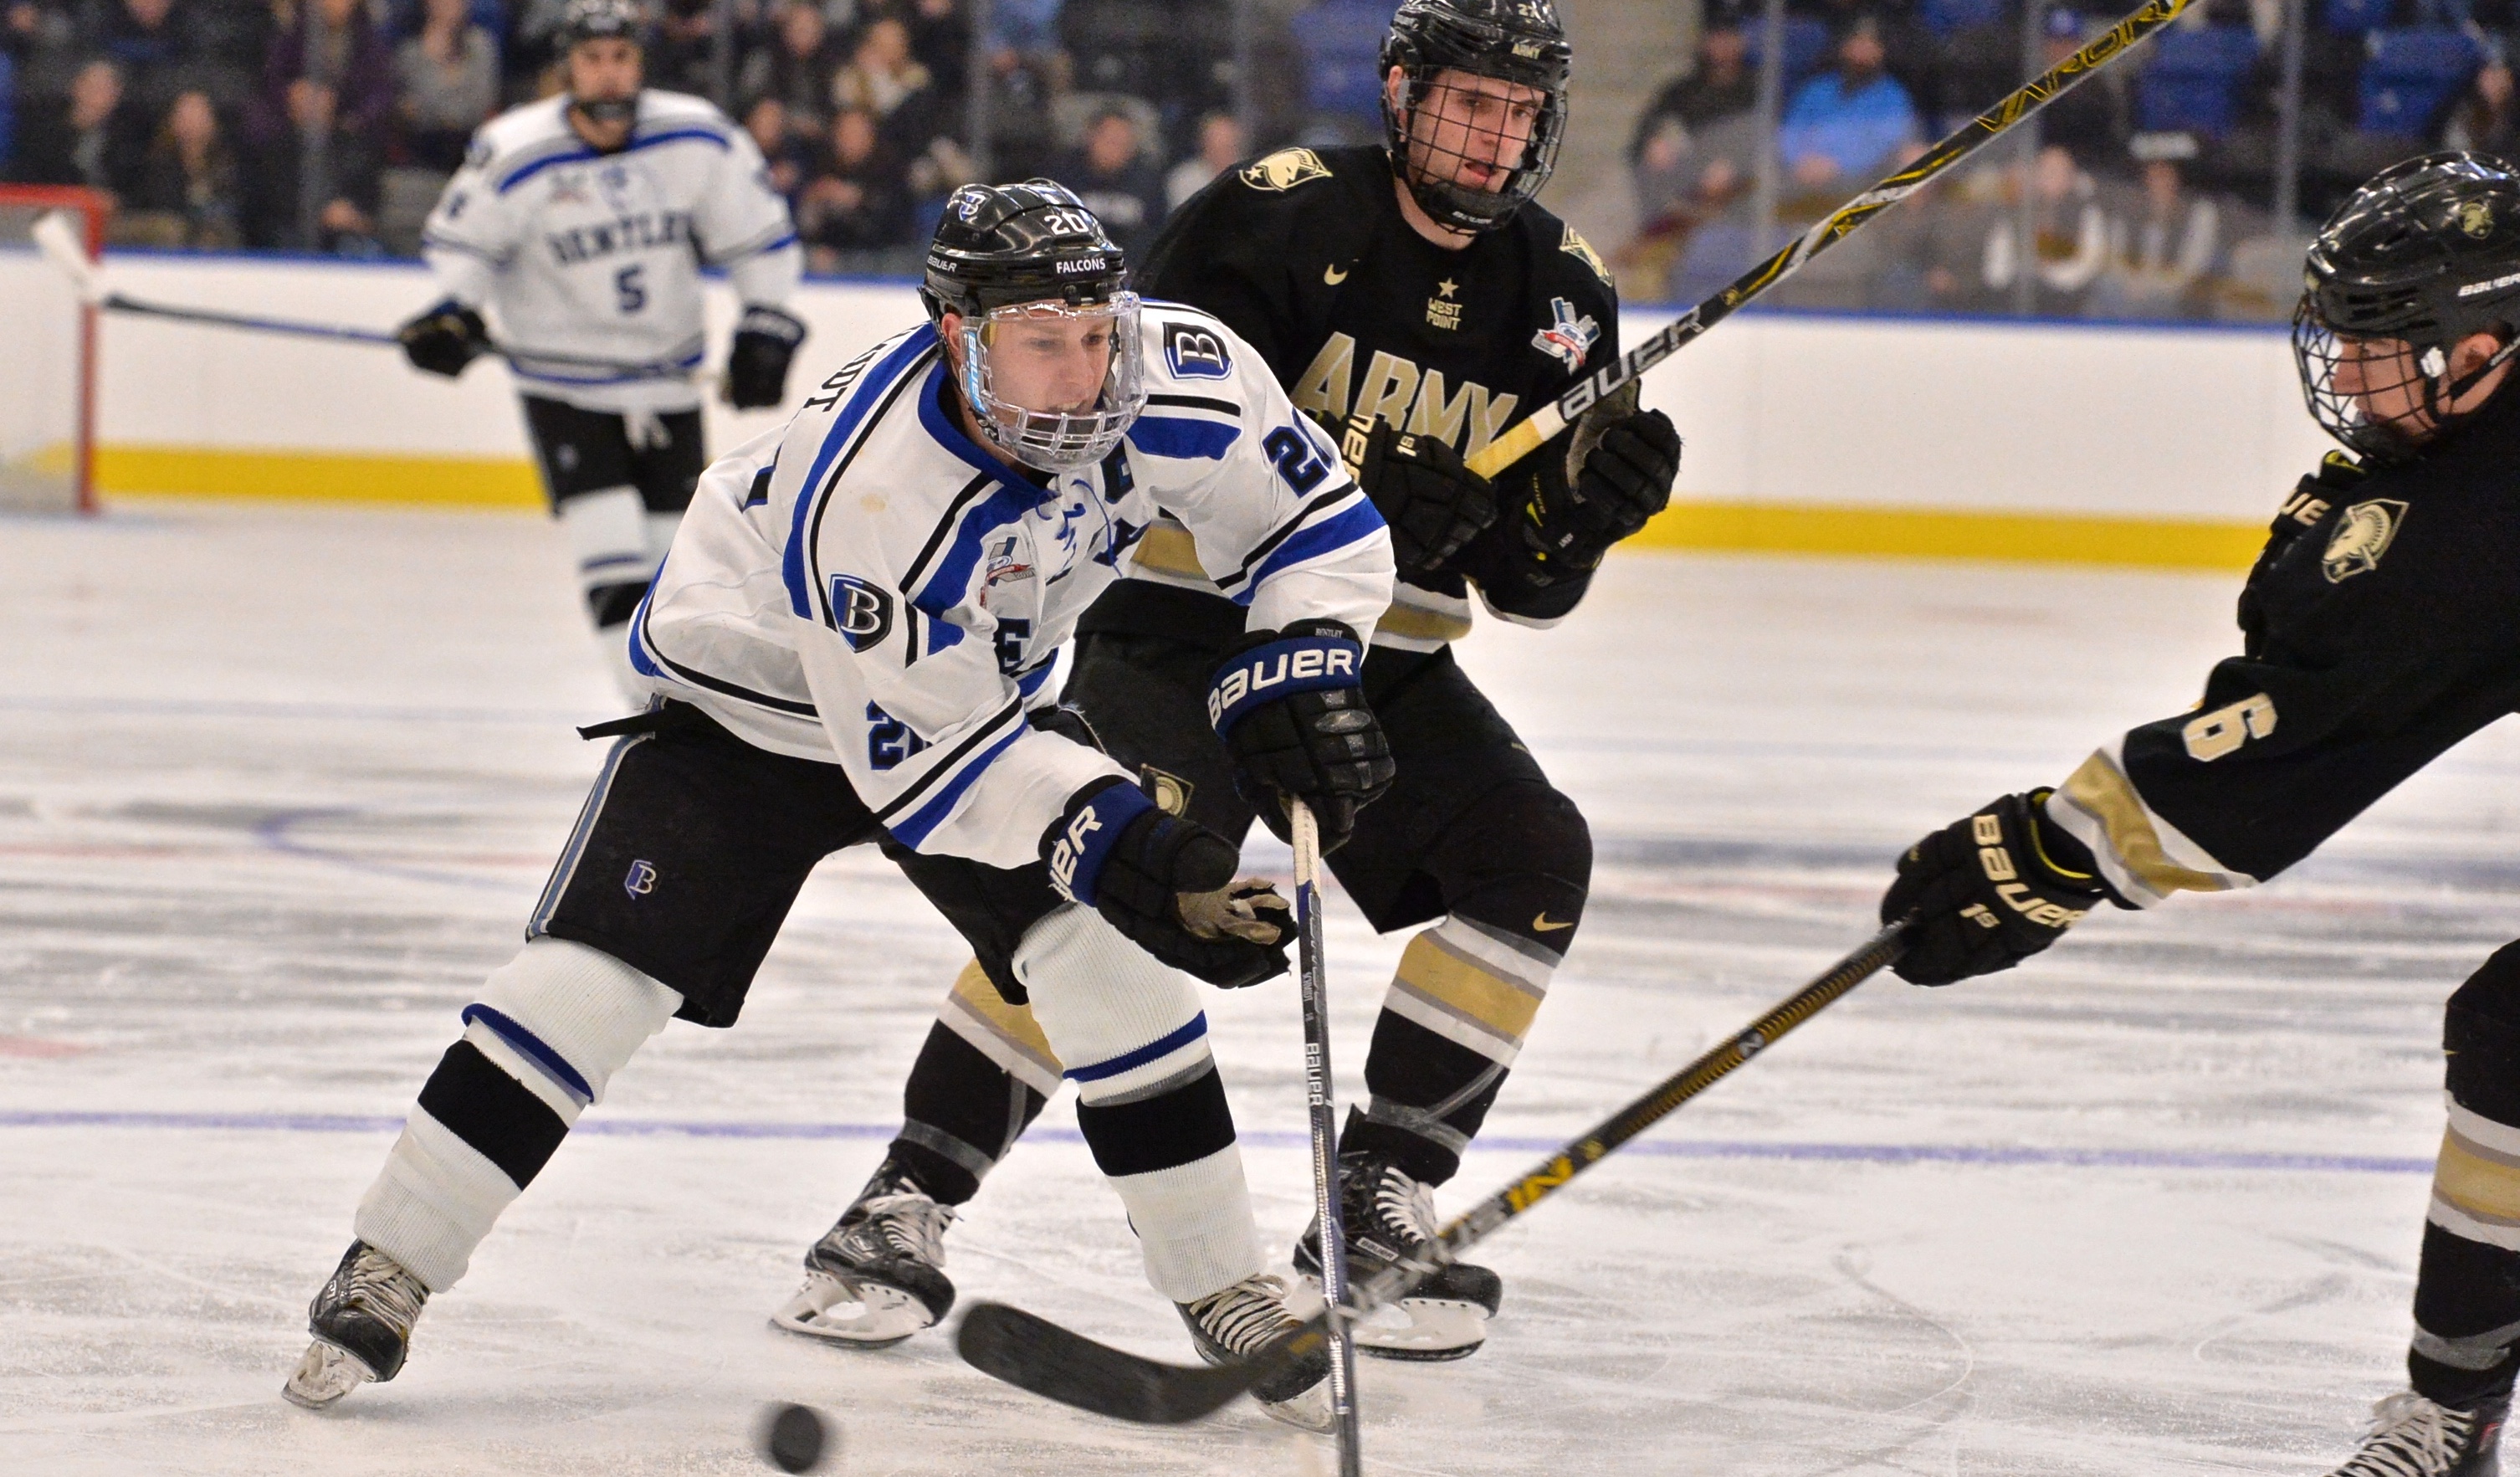 FloSports Solidifies Its Position As The Leader In College Hockey With